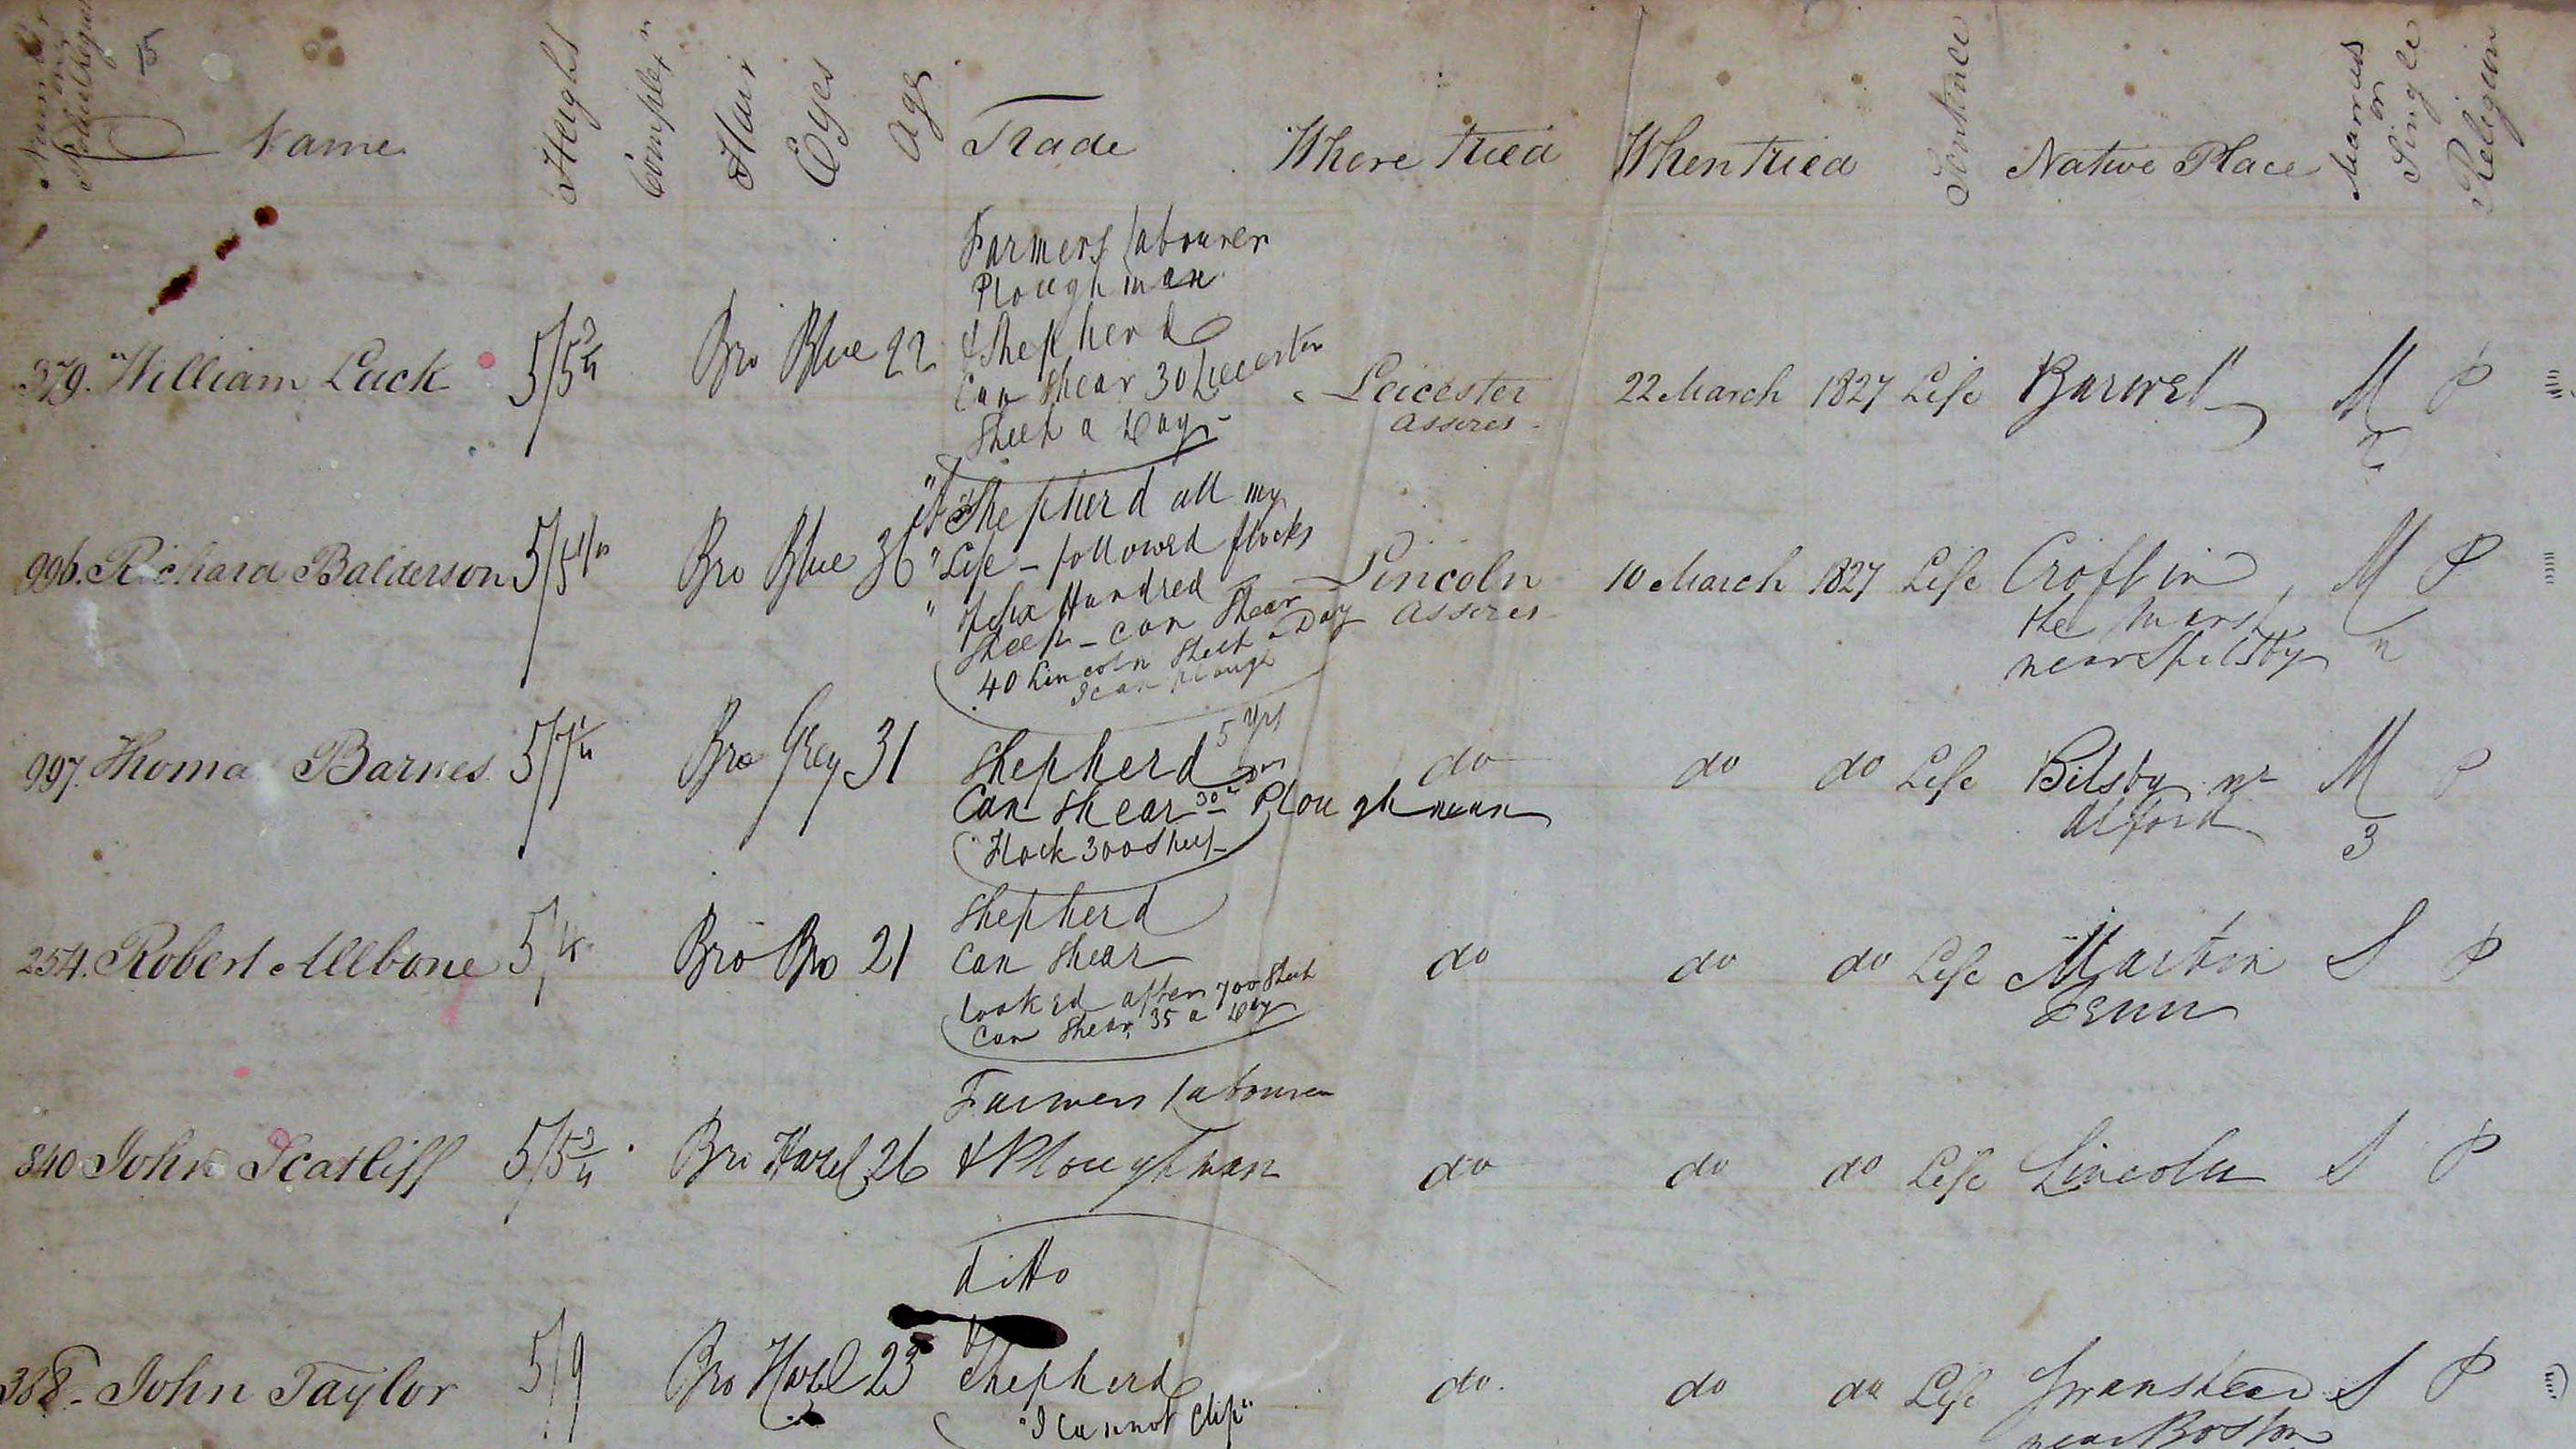 Excerpt from ledgers held as part of Brickendon Estate’s archives mentioning William Luck.